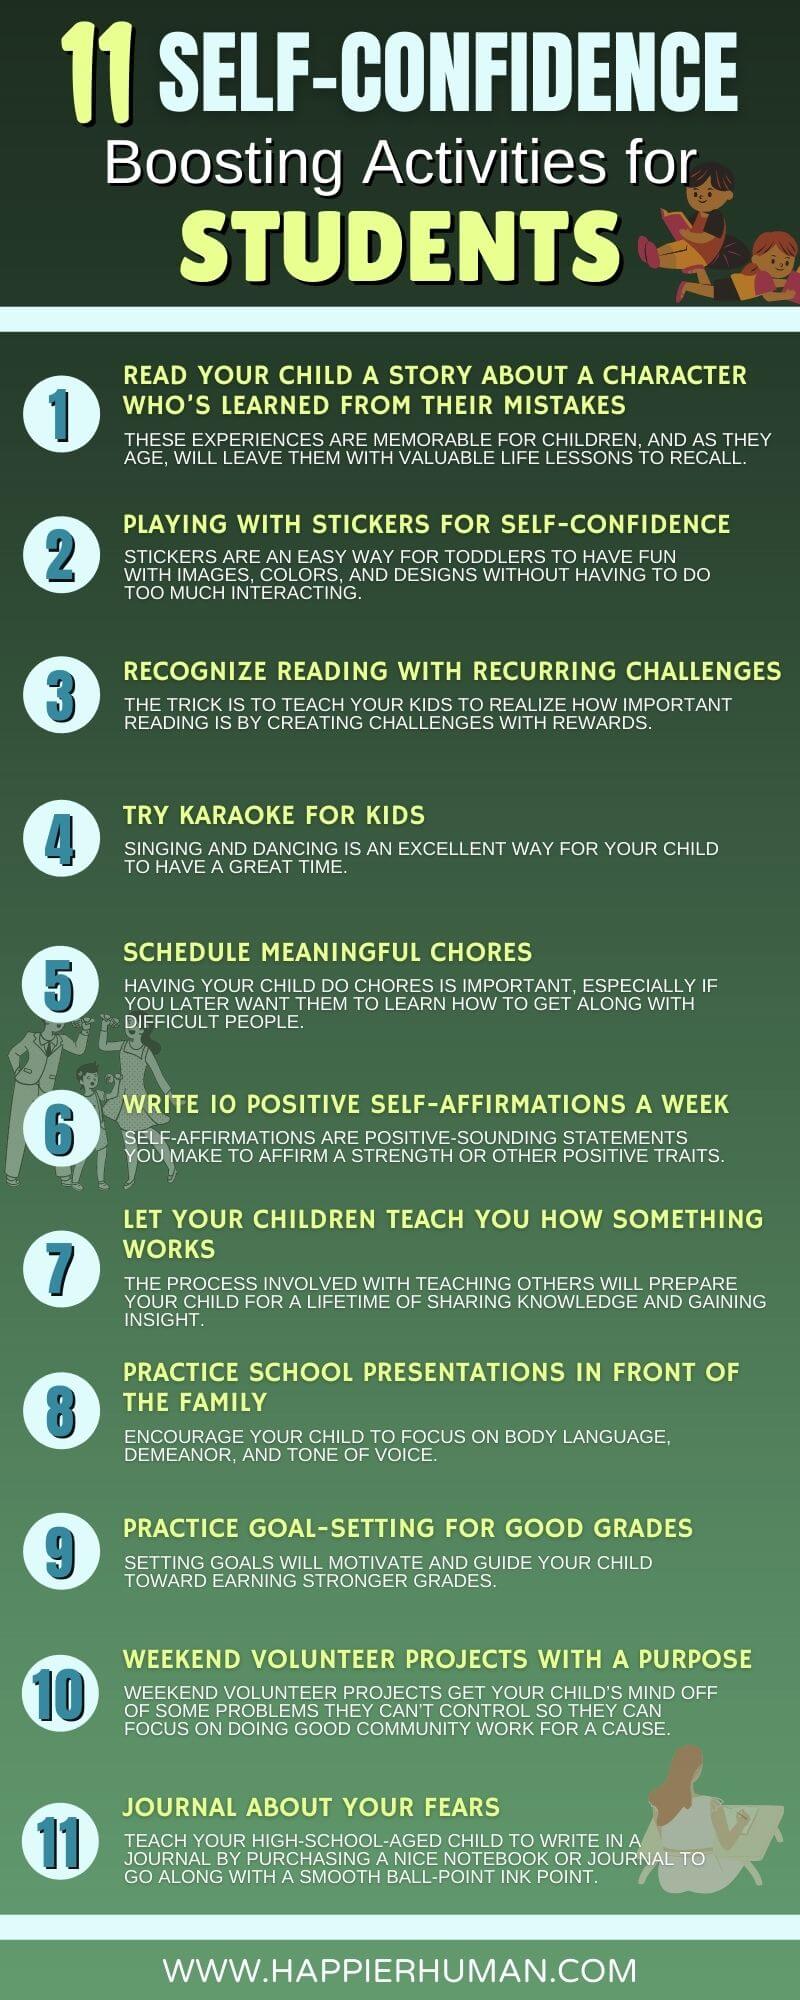 11 Self-Confidence Boosting Activities for Students - Happier Human